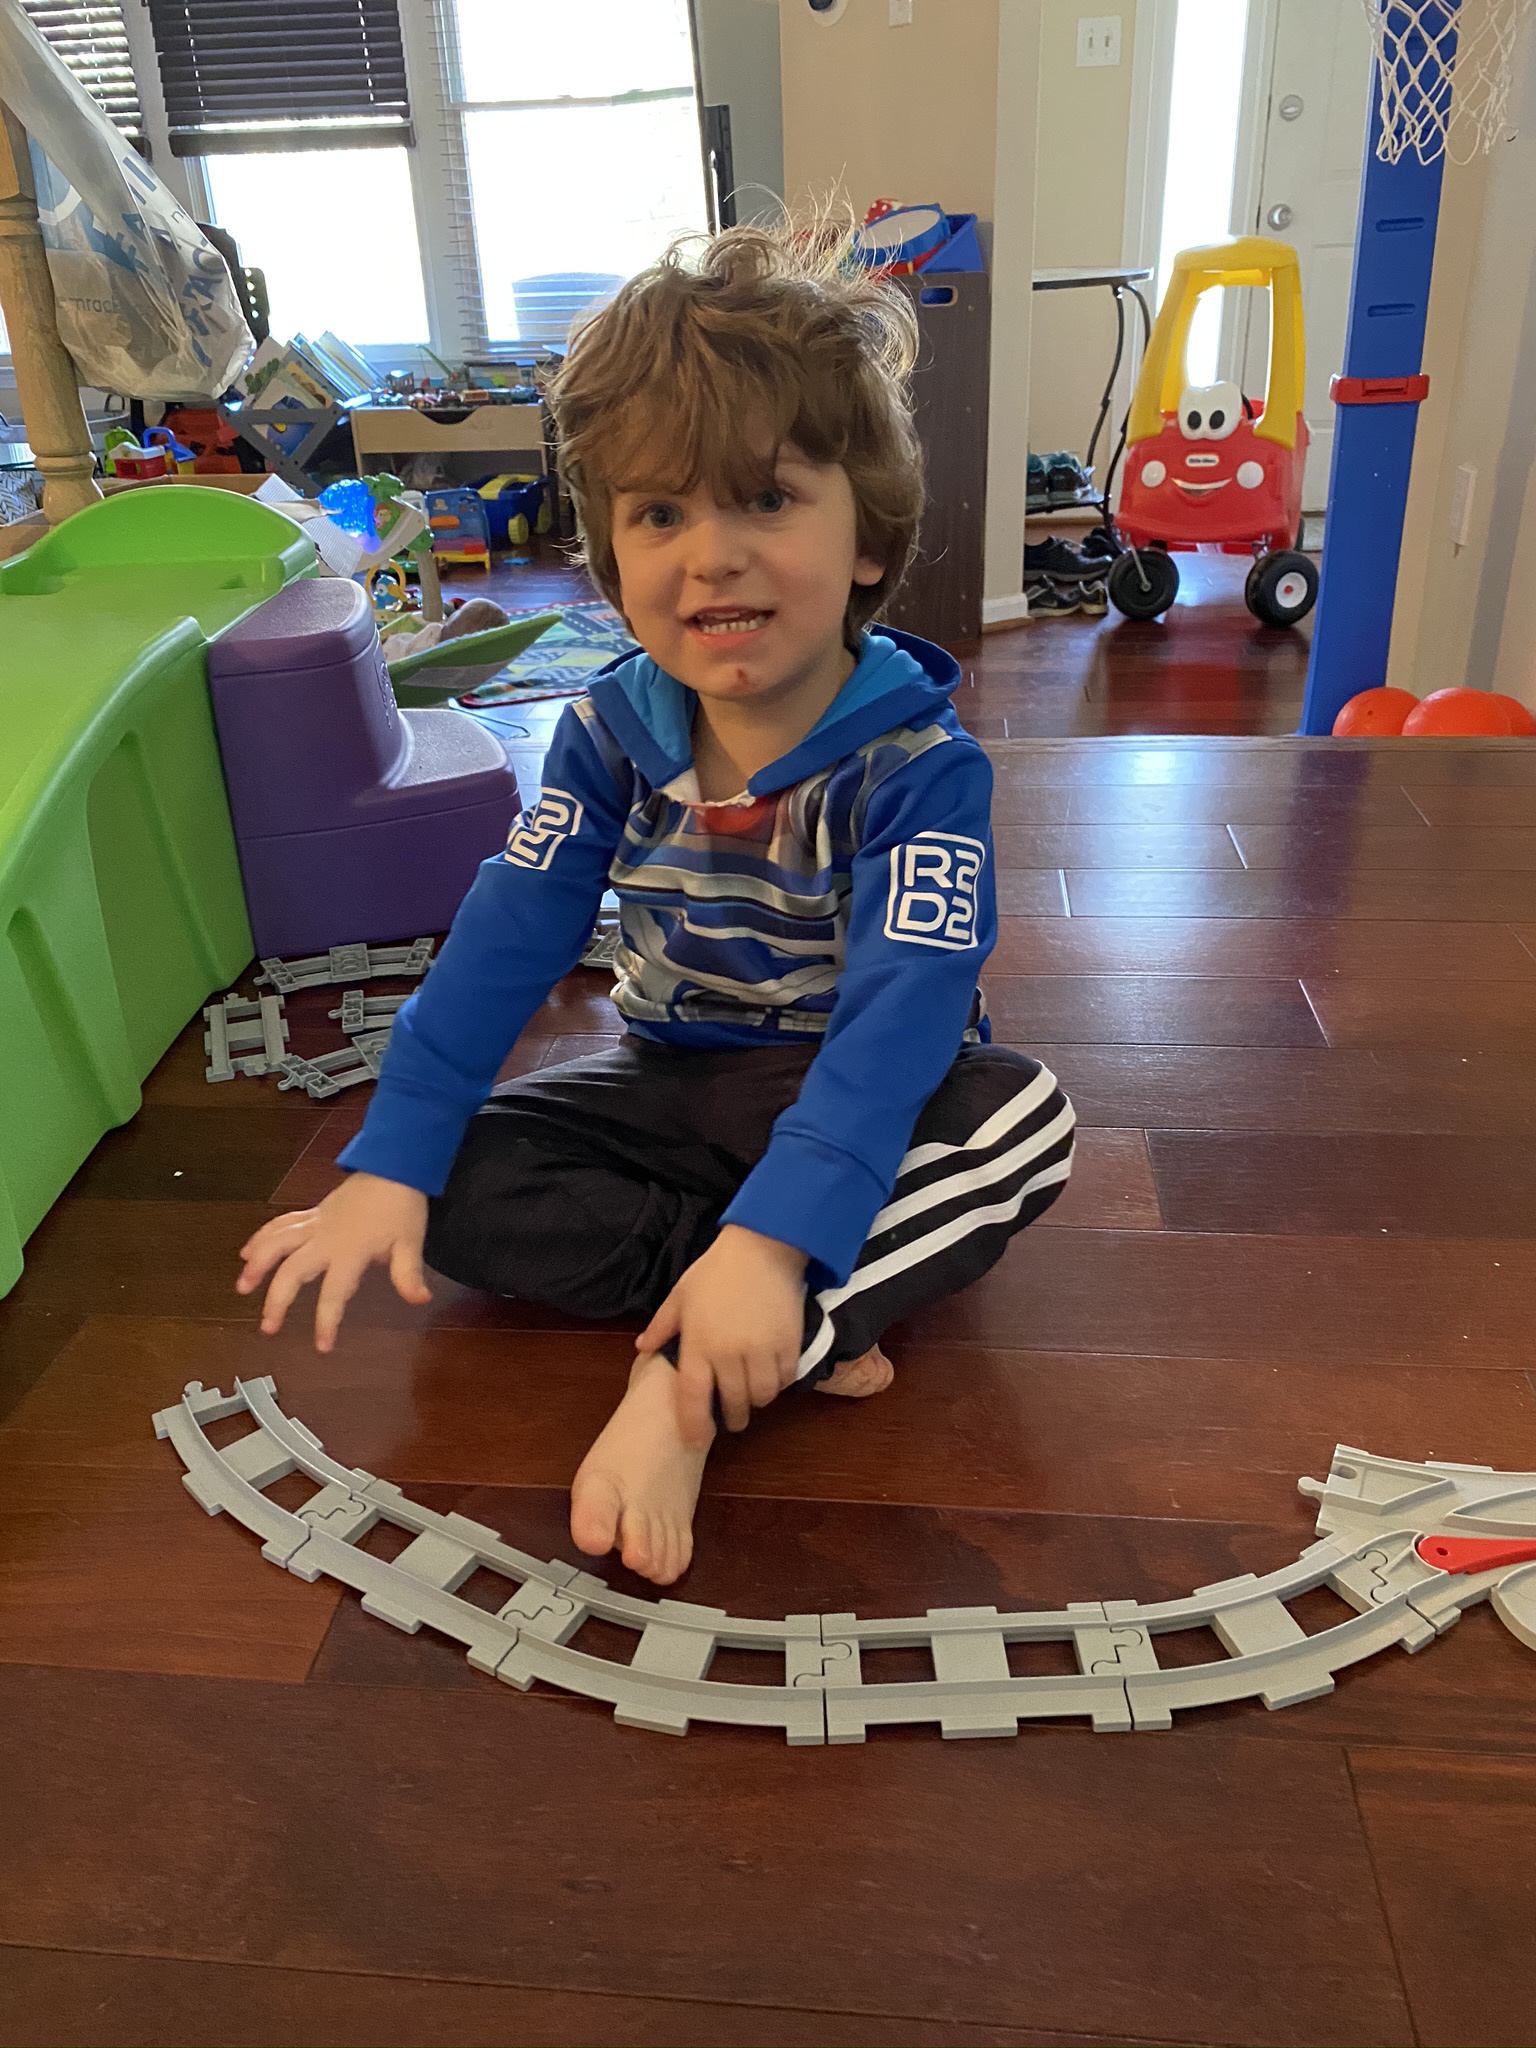 Young boy playing with toy train tracks